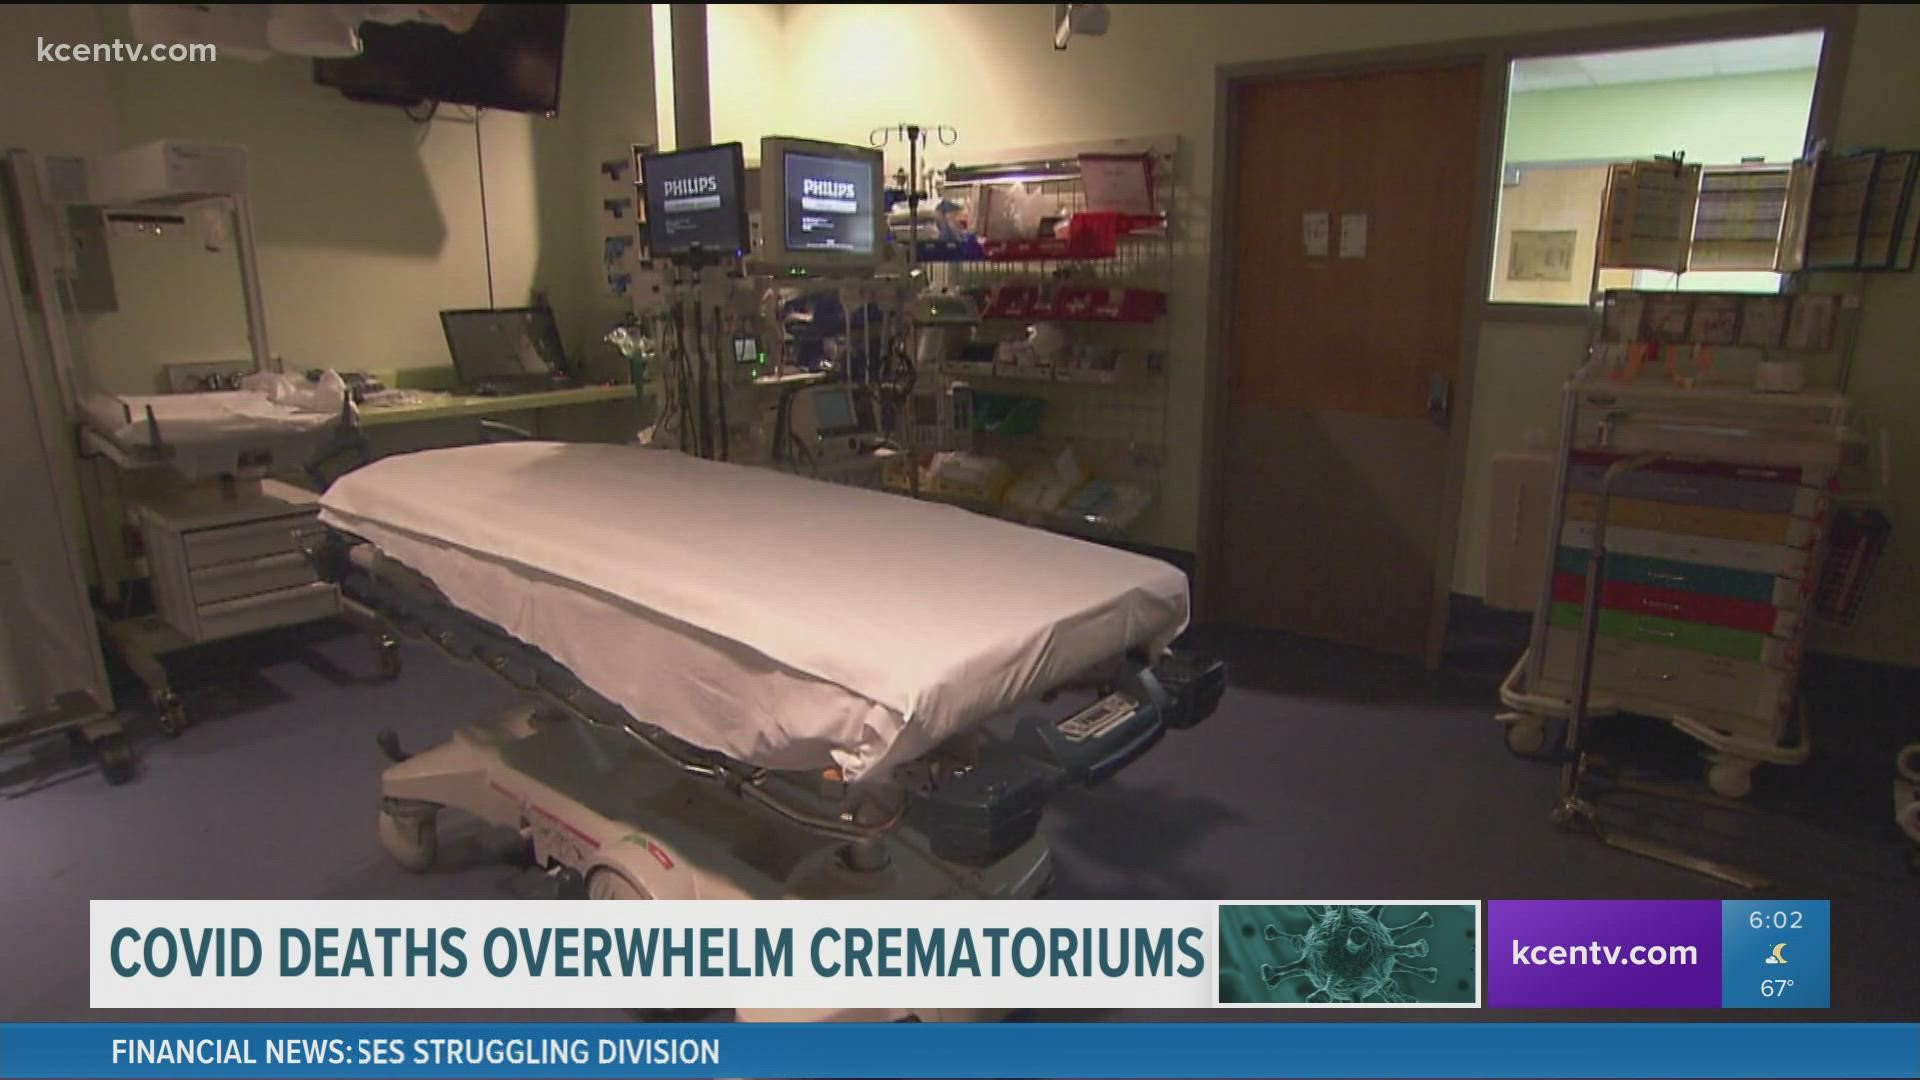 Andrew Moore explores how crematoriums are handling the spike in COVID-19 deaths.